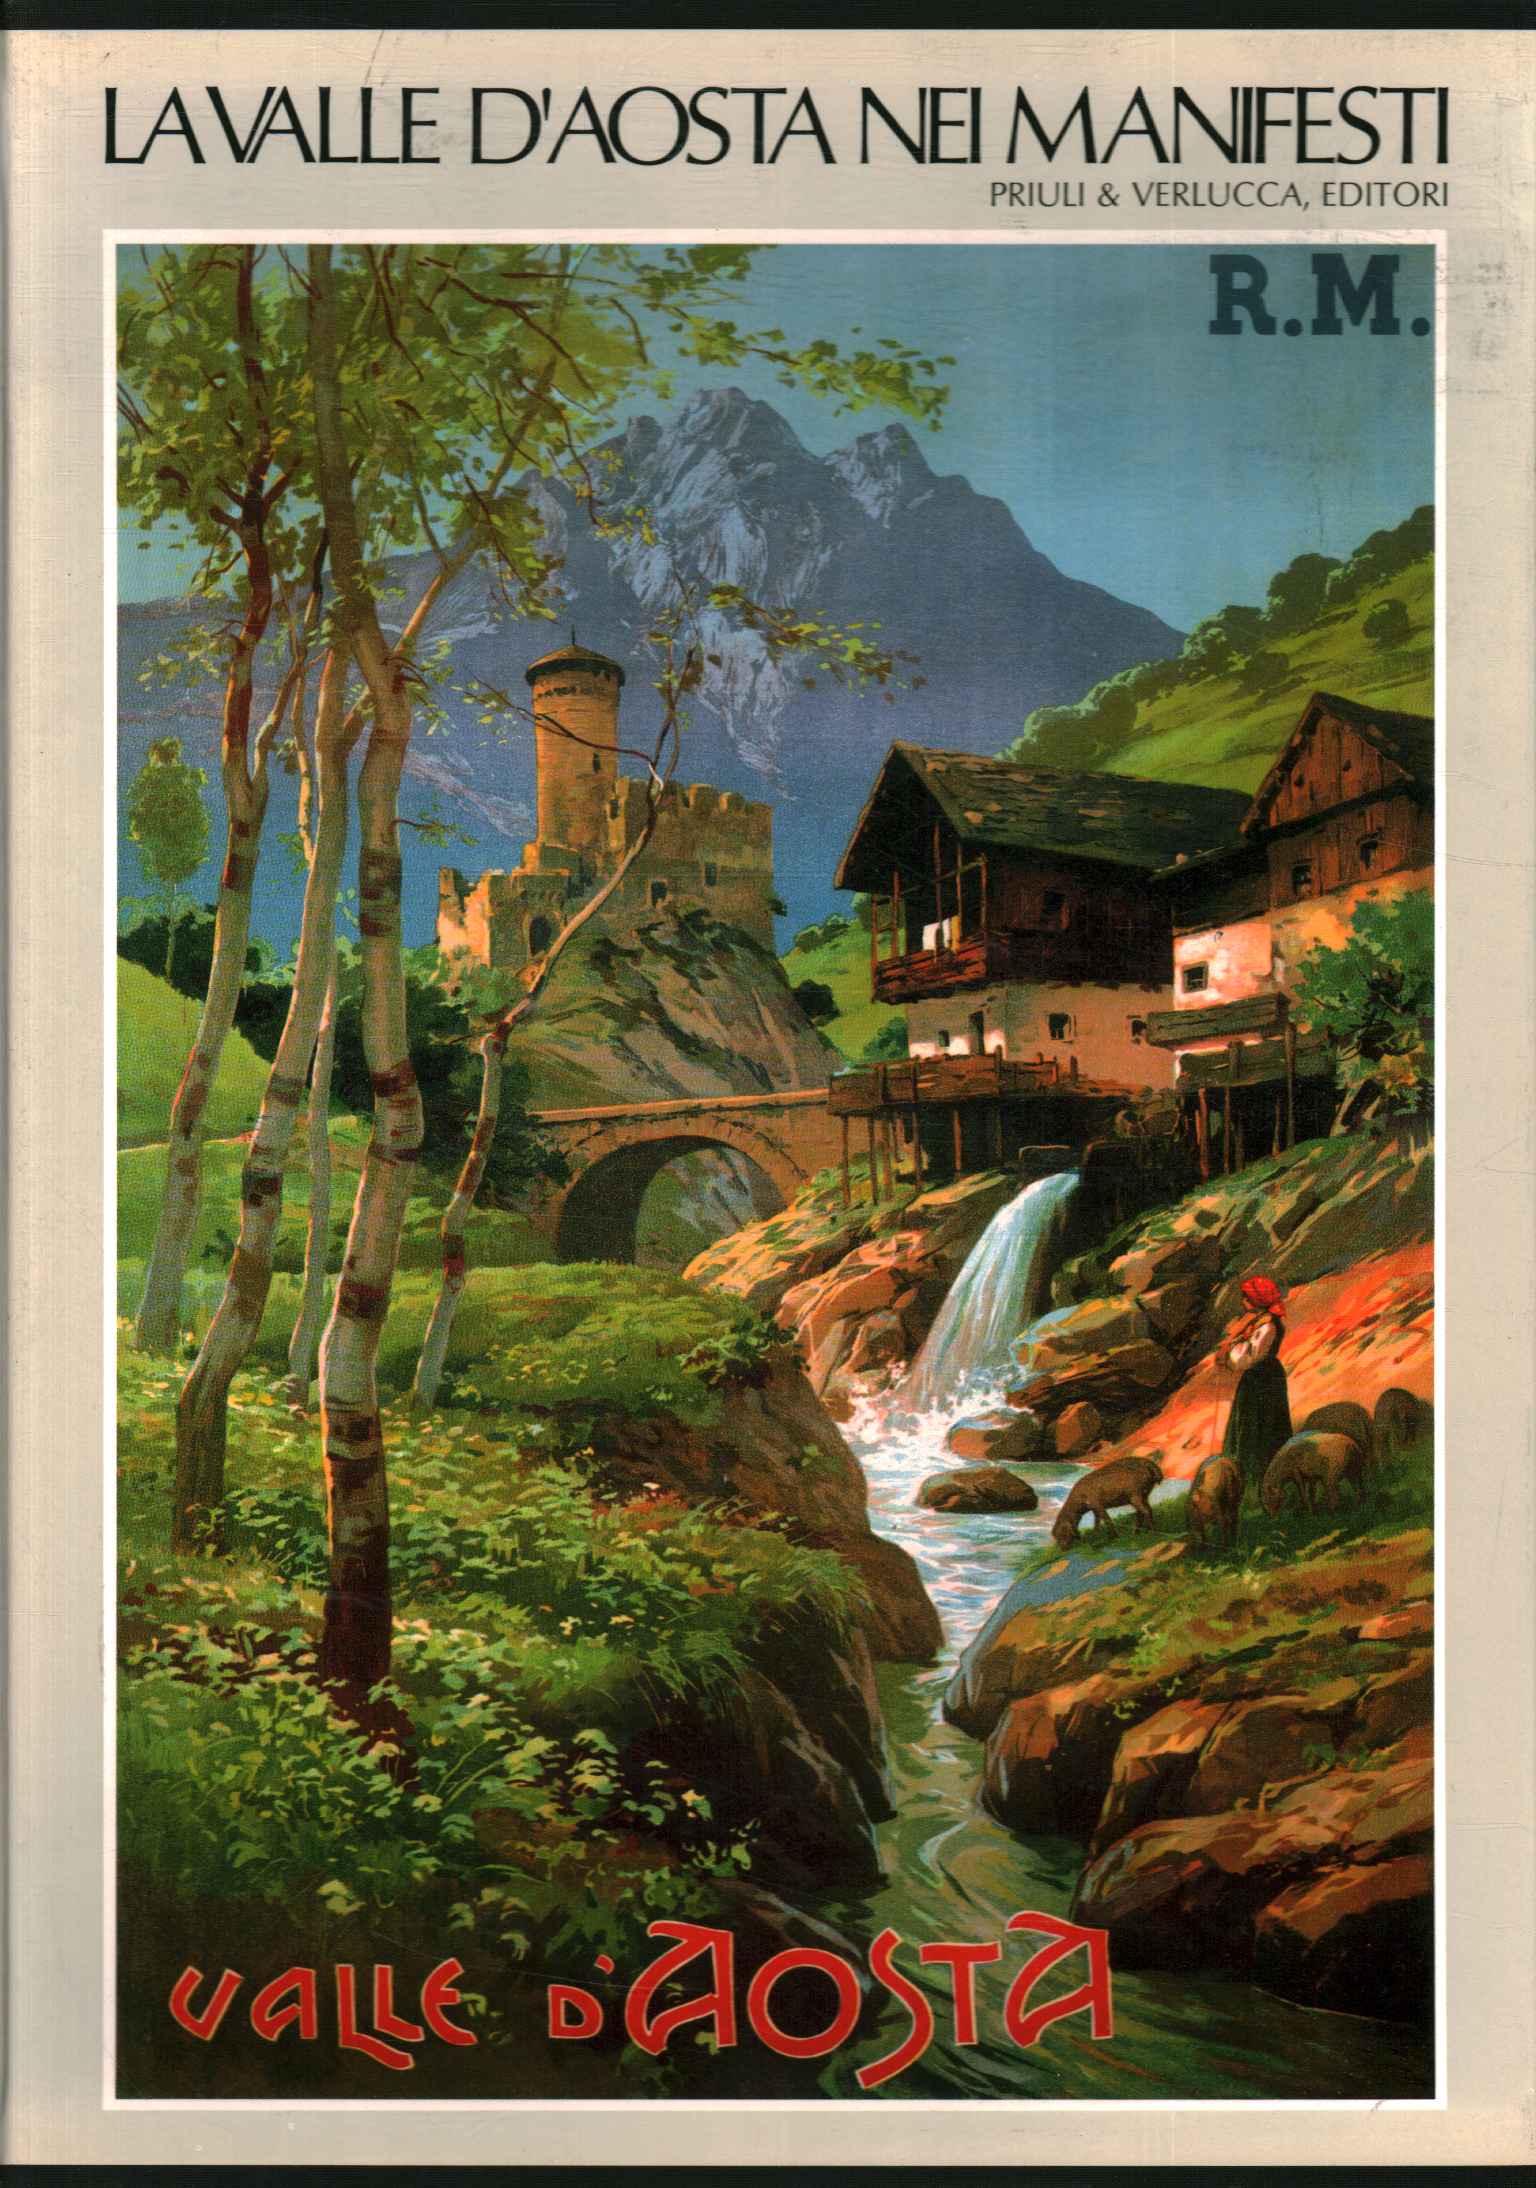 The Aosta Valley on posters.